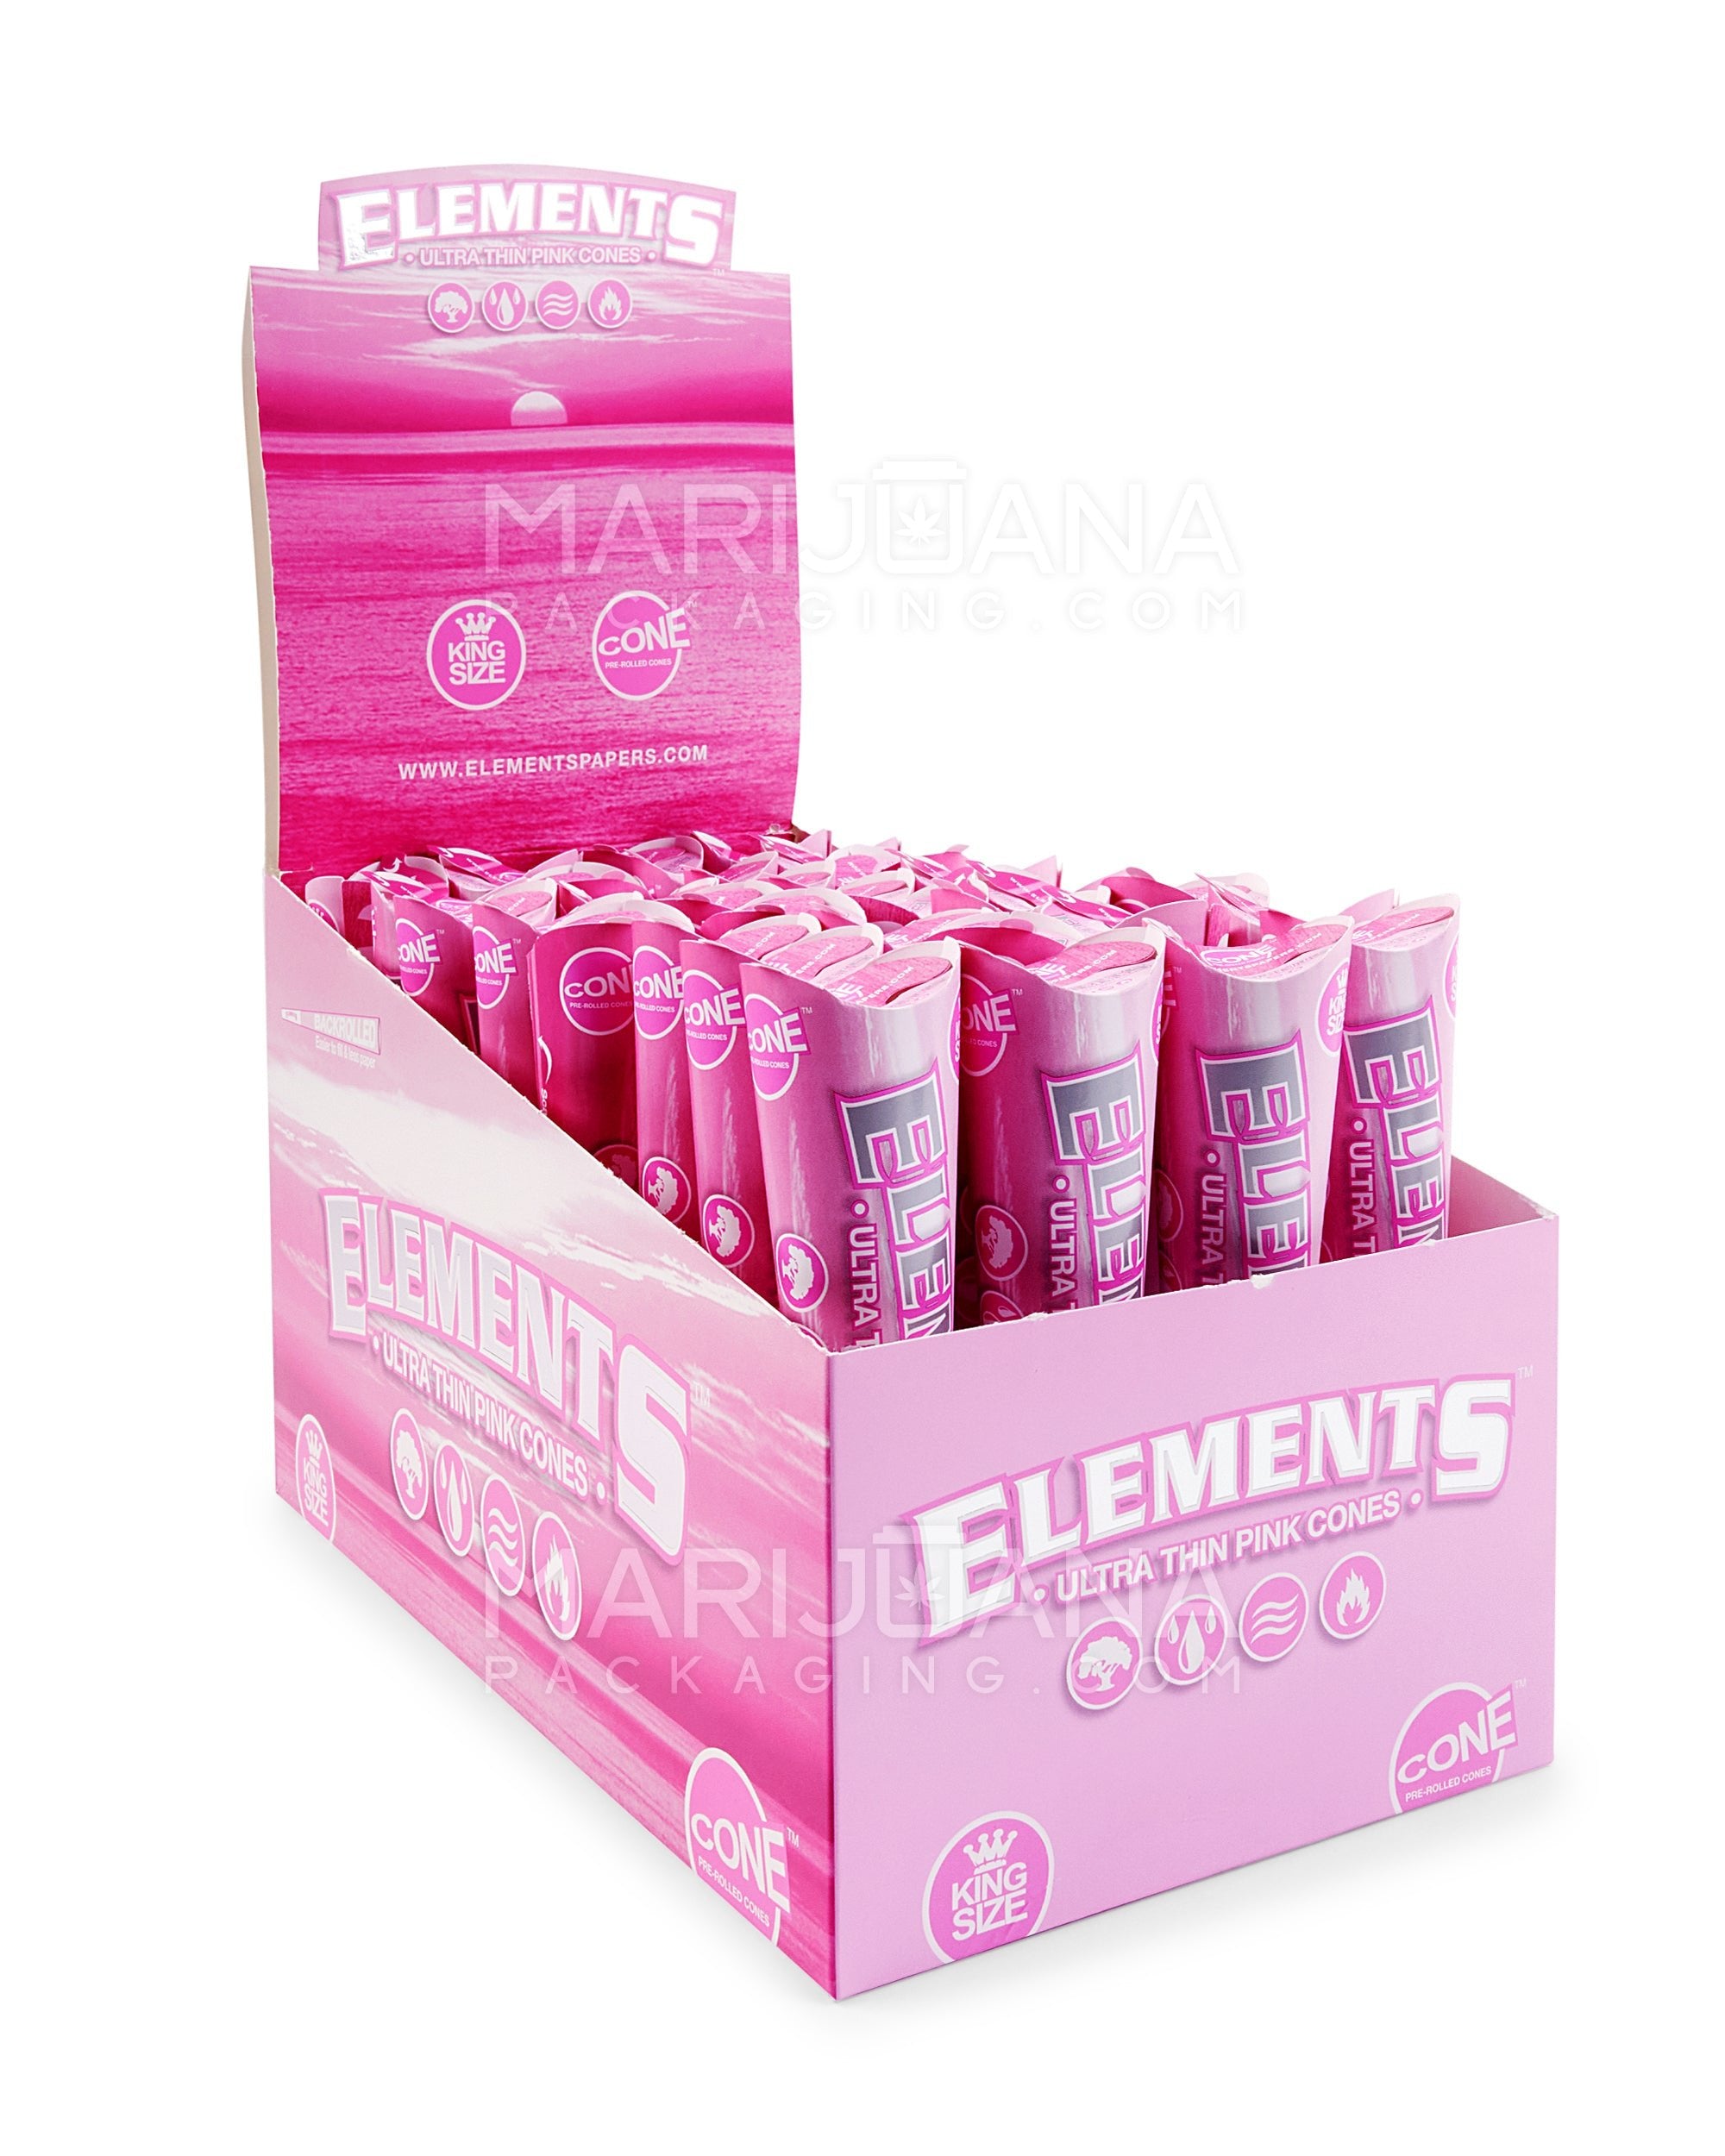 ELEMENTS | 'Retail Display' King Size Ultra Thin Pre-Rolled Cones | 109mm - Pink Rice Paper - 32 Count - 6